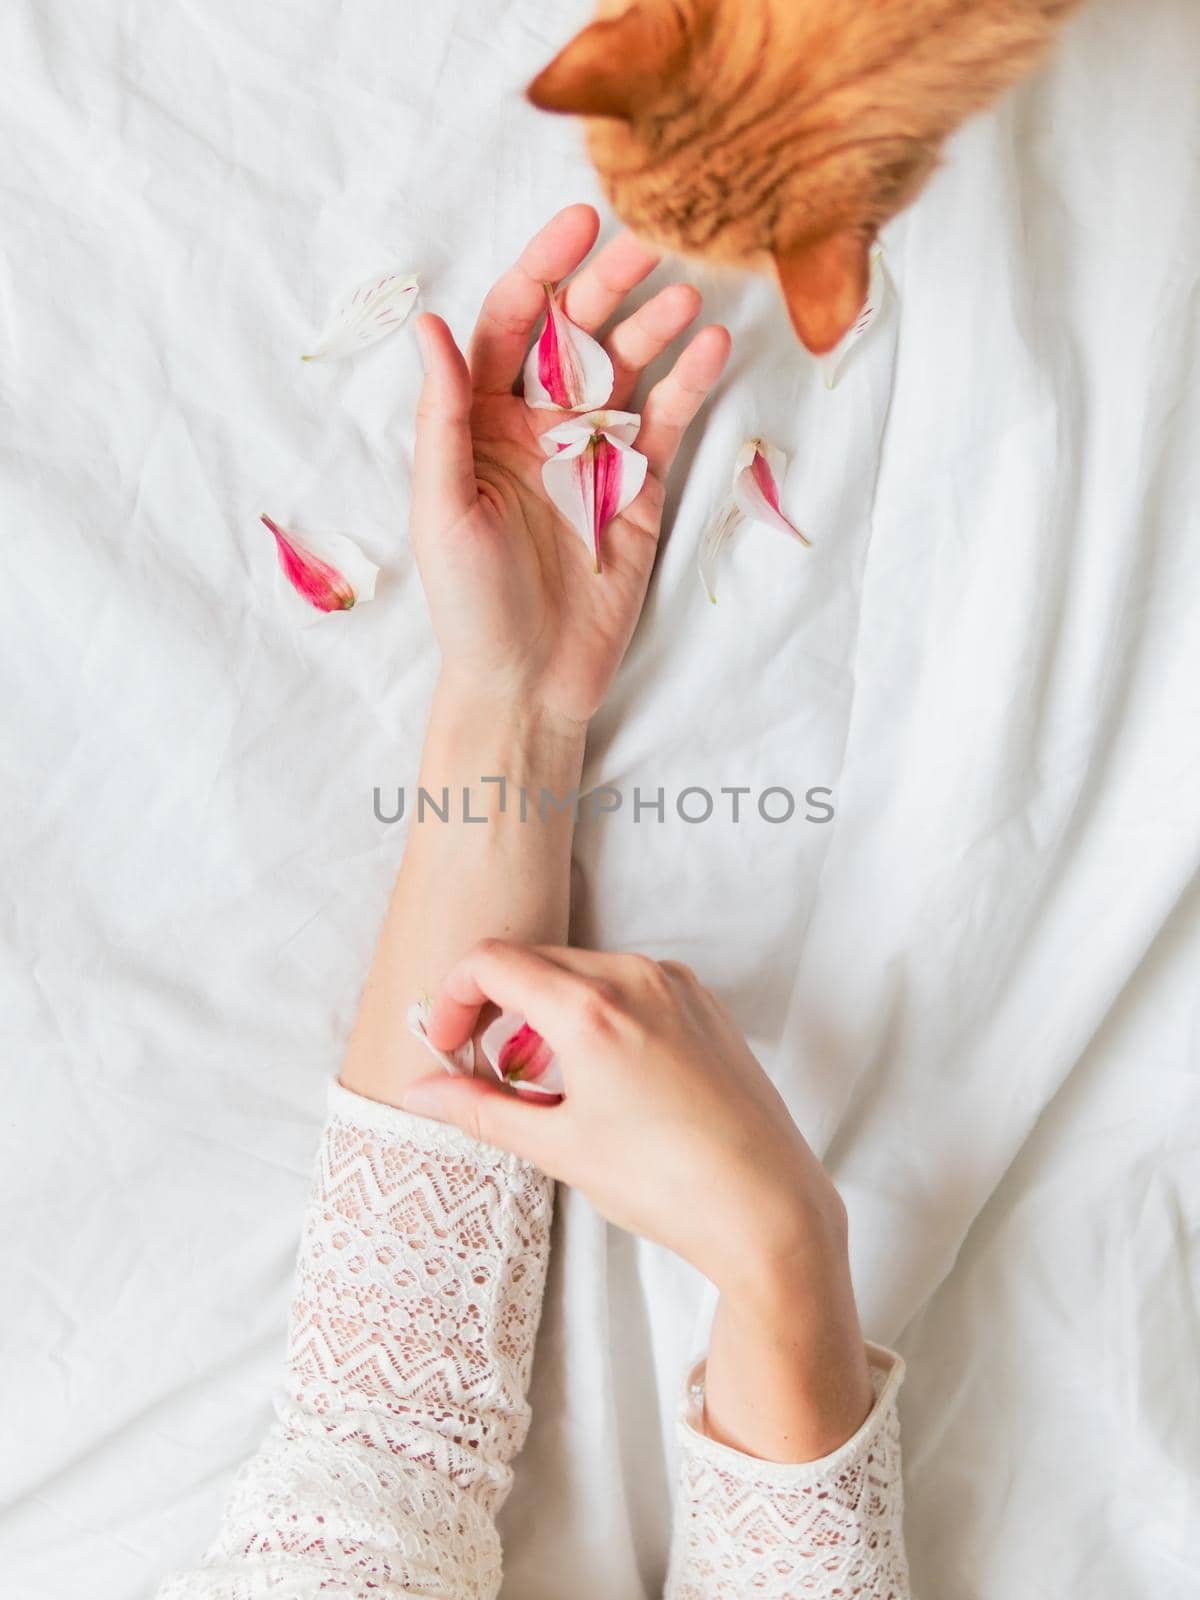 Top view on ginger cat sniffing woman's hands with pink flower petals. Fluffy pet and pet owner crumpled white textile background.